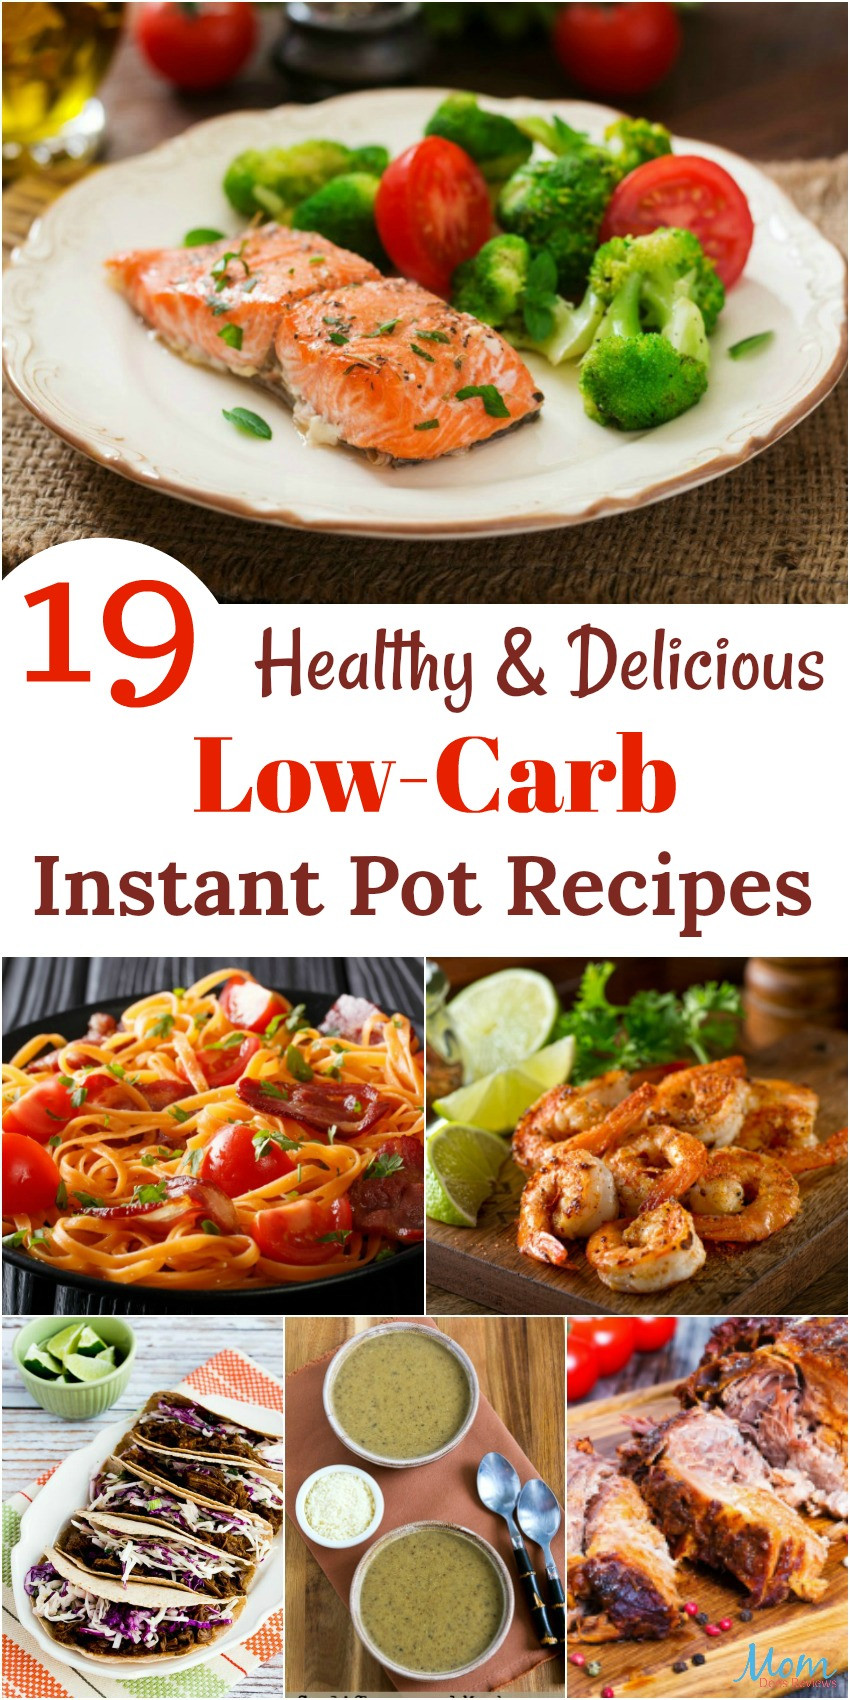 Low Carb Recipes For Instant Pot
 19 Healthy & Delicious Low Carb Instant Pot Recipes